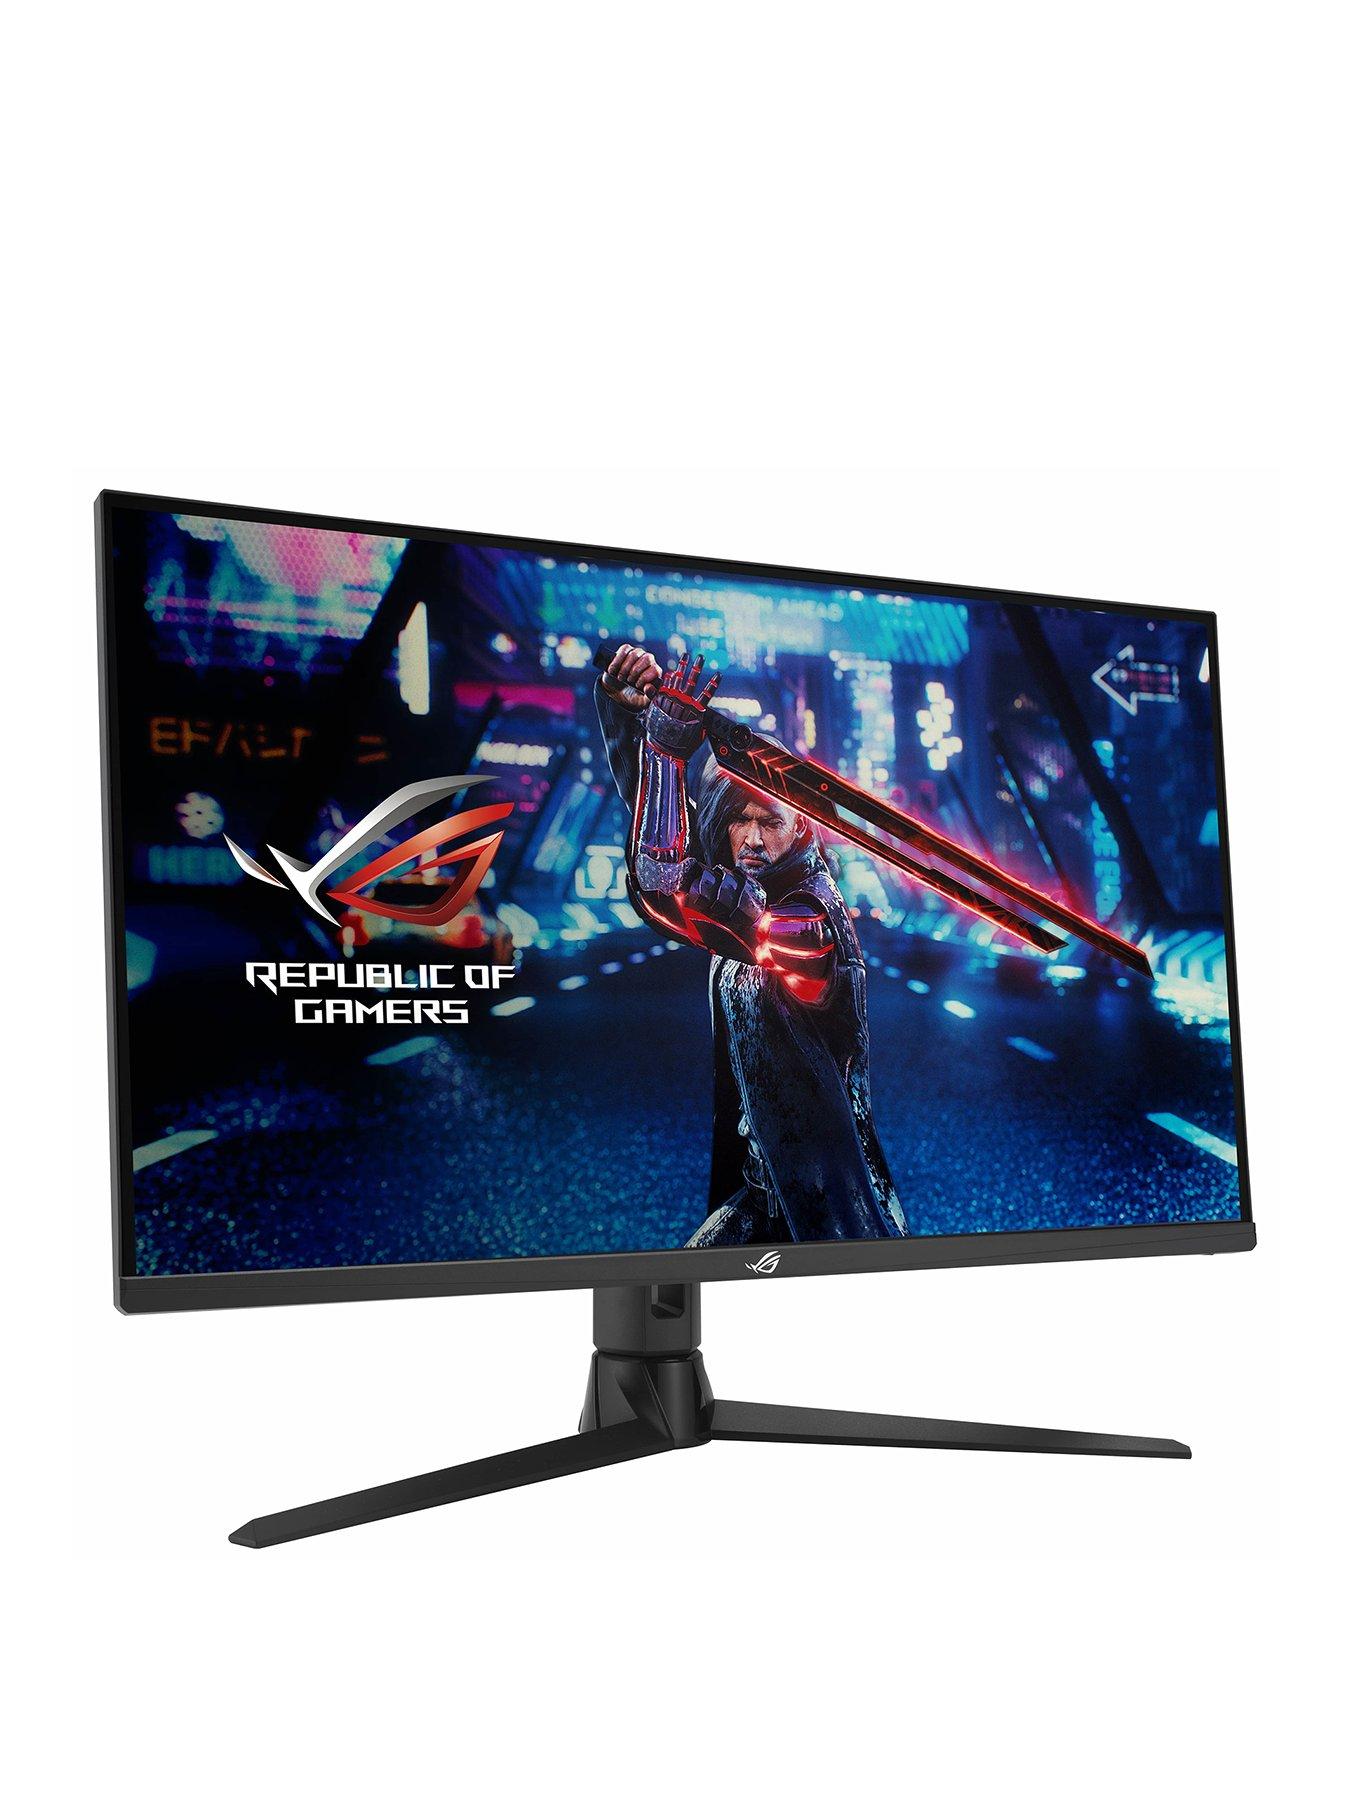 Asus' new 4K HDMI 2.1 gaming monitor looks like a beast